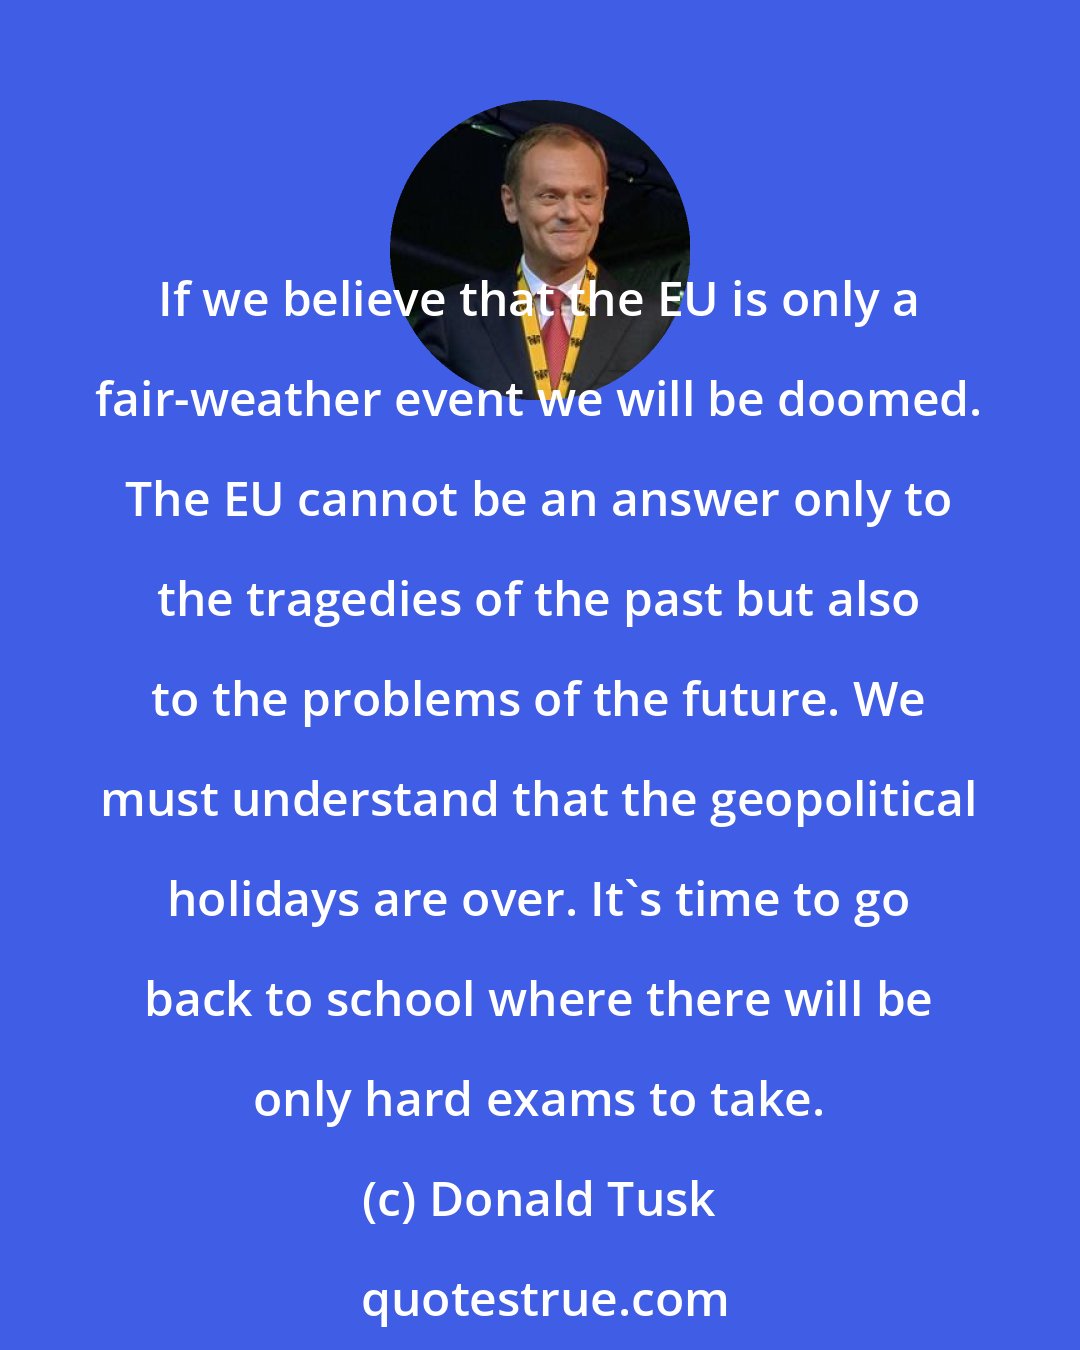 Donald Tusk: If we believe that the EU is only a fair-weather event we will be doomed. The EU cannot be an answer only to the tragedies of the past but also to the problems of the future. We must understand that the geopolitical holidays are over. It's time to go back to school where there will be only hard exams to take.